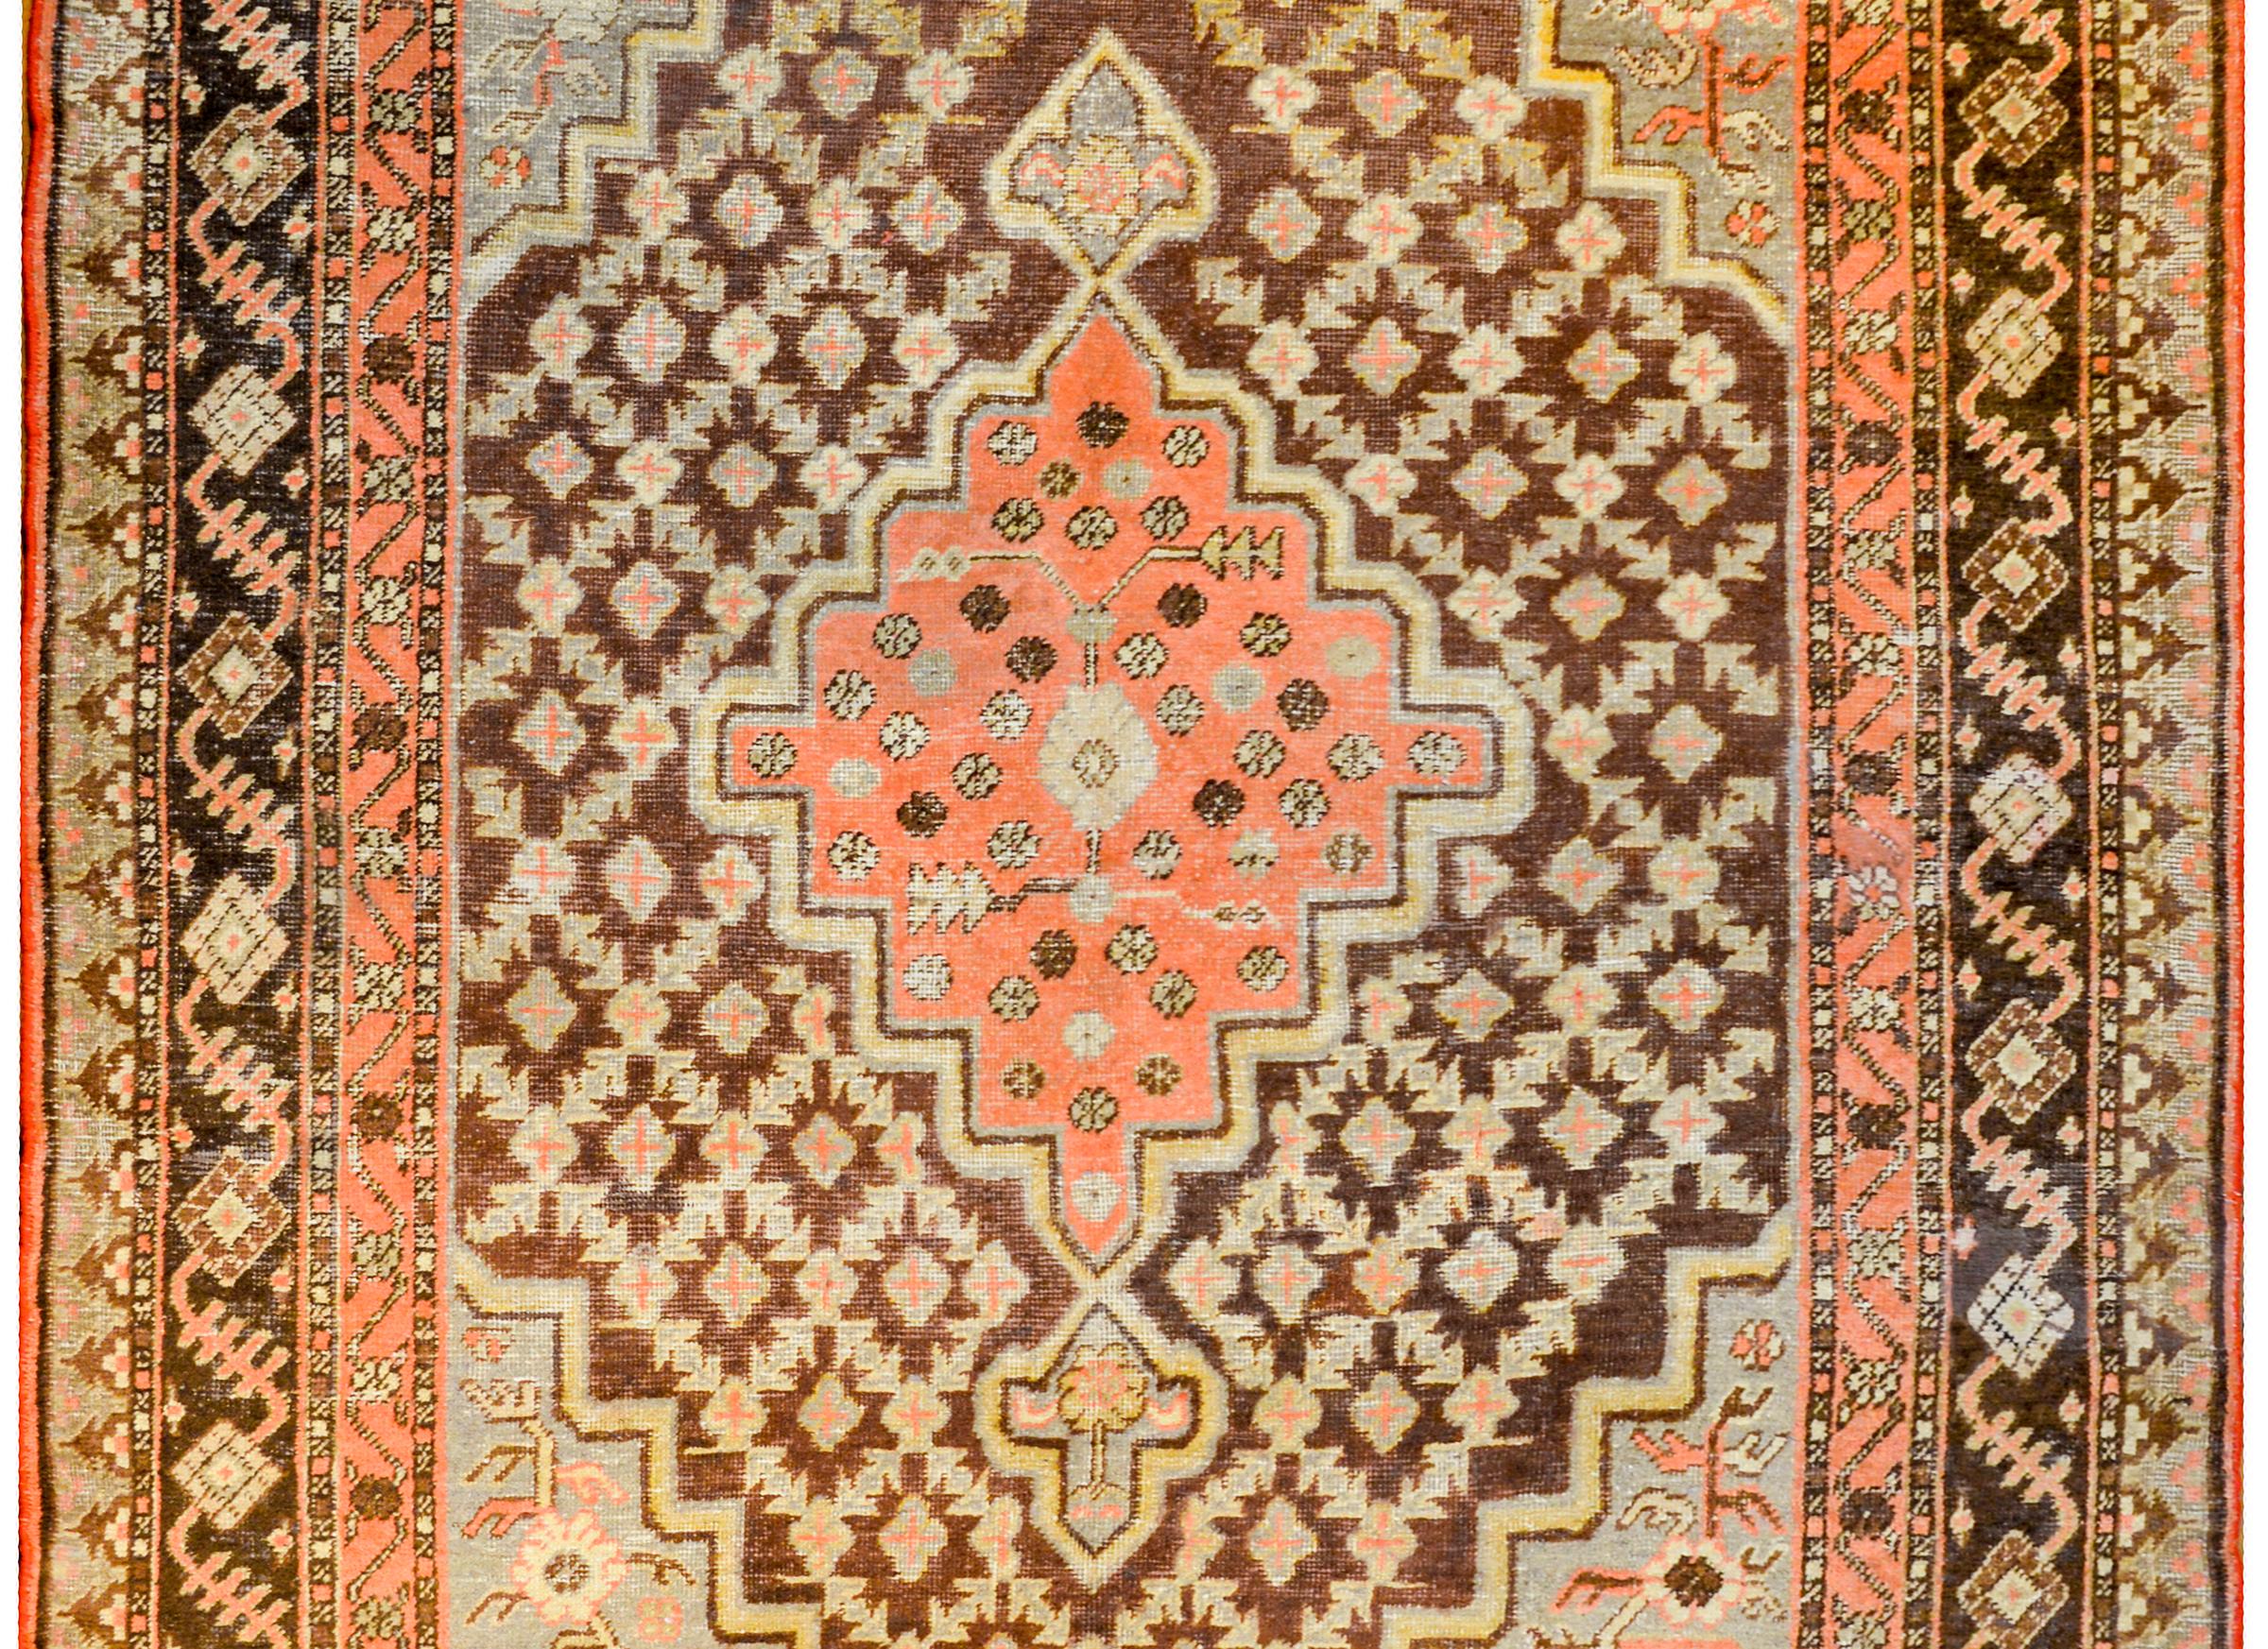 A beautiful early 20th century Central Asian Samarghand rug with a large central stepped diamond medallion with a petite floral pattern on a light coral colored background. The medallion lives amidst a trellis and floral pattern on a brown ground.